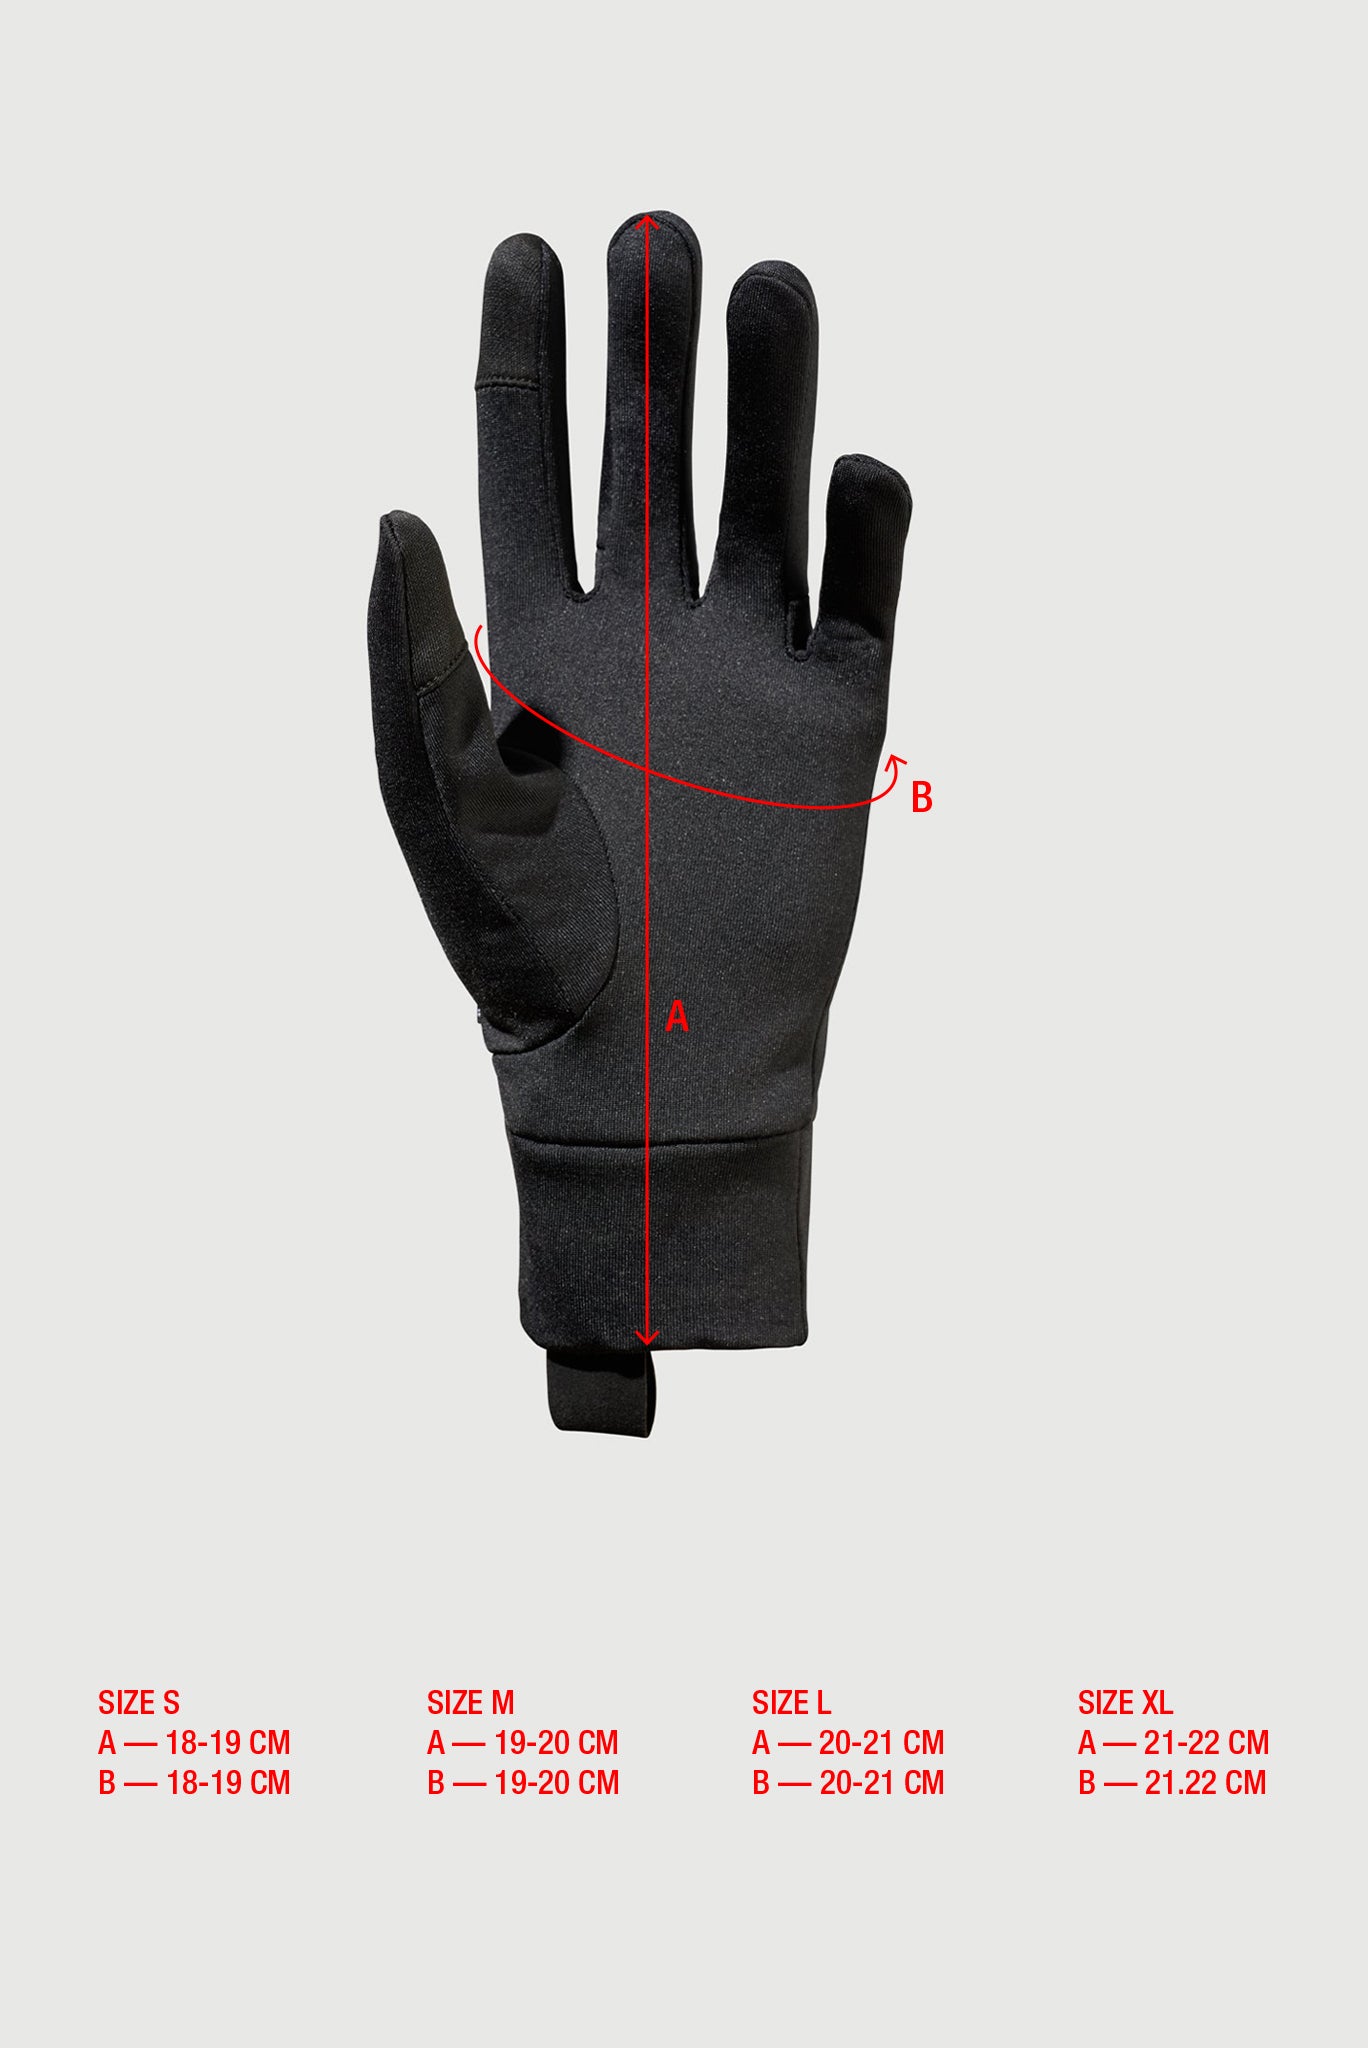 12345 HANDS-ON City Gloves